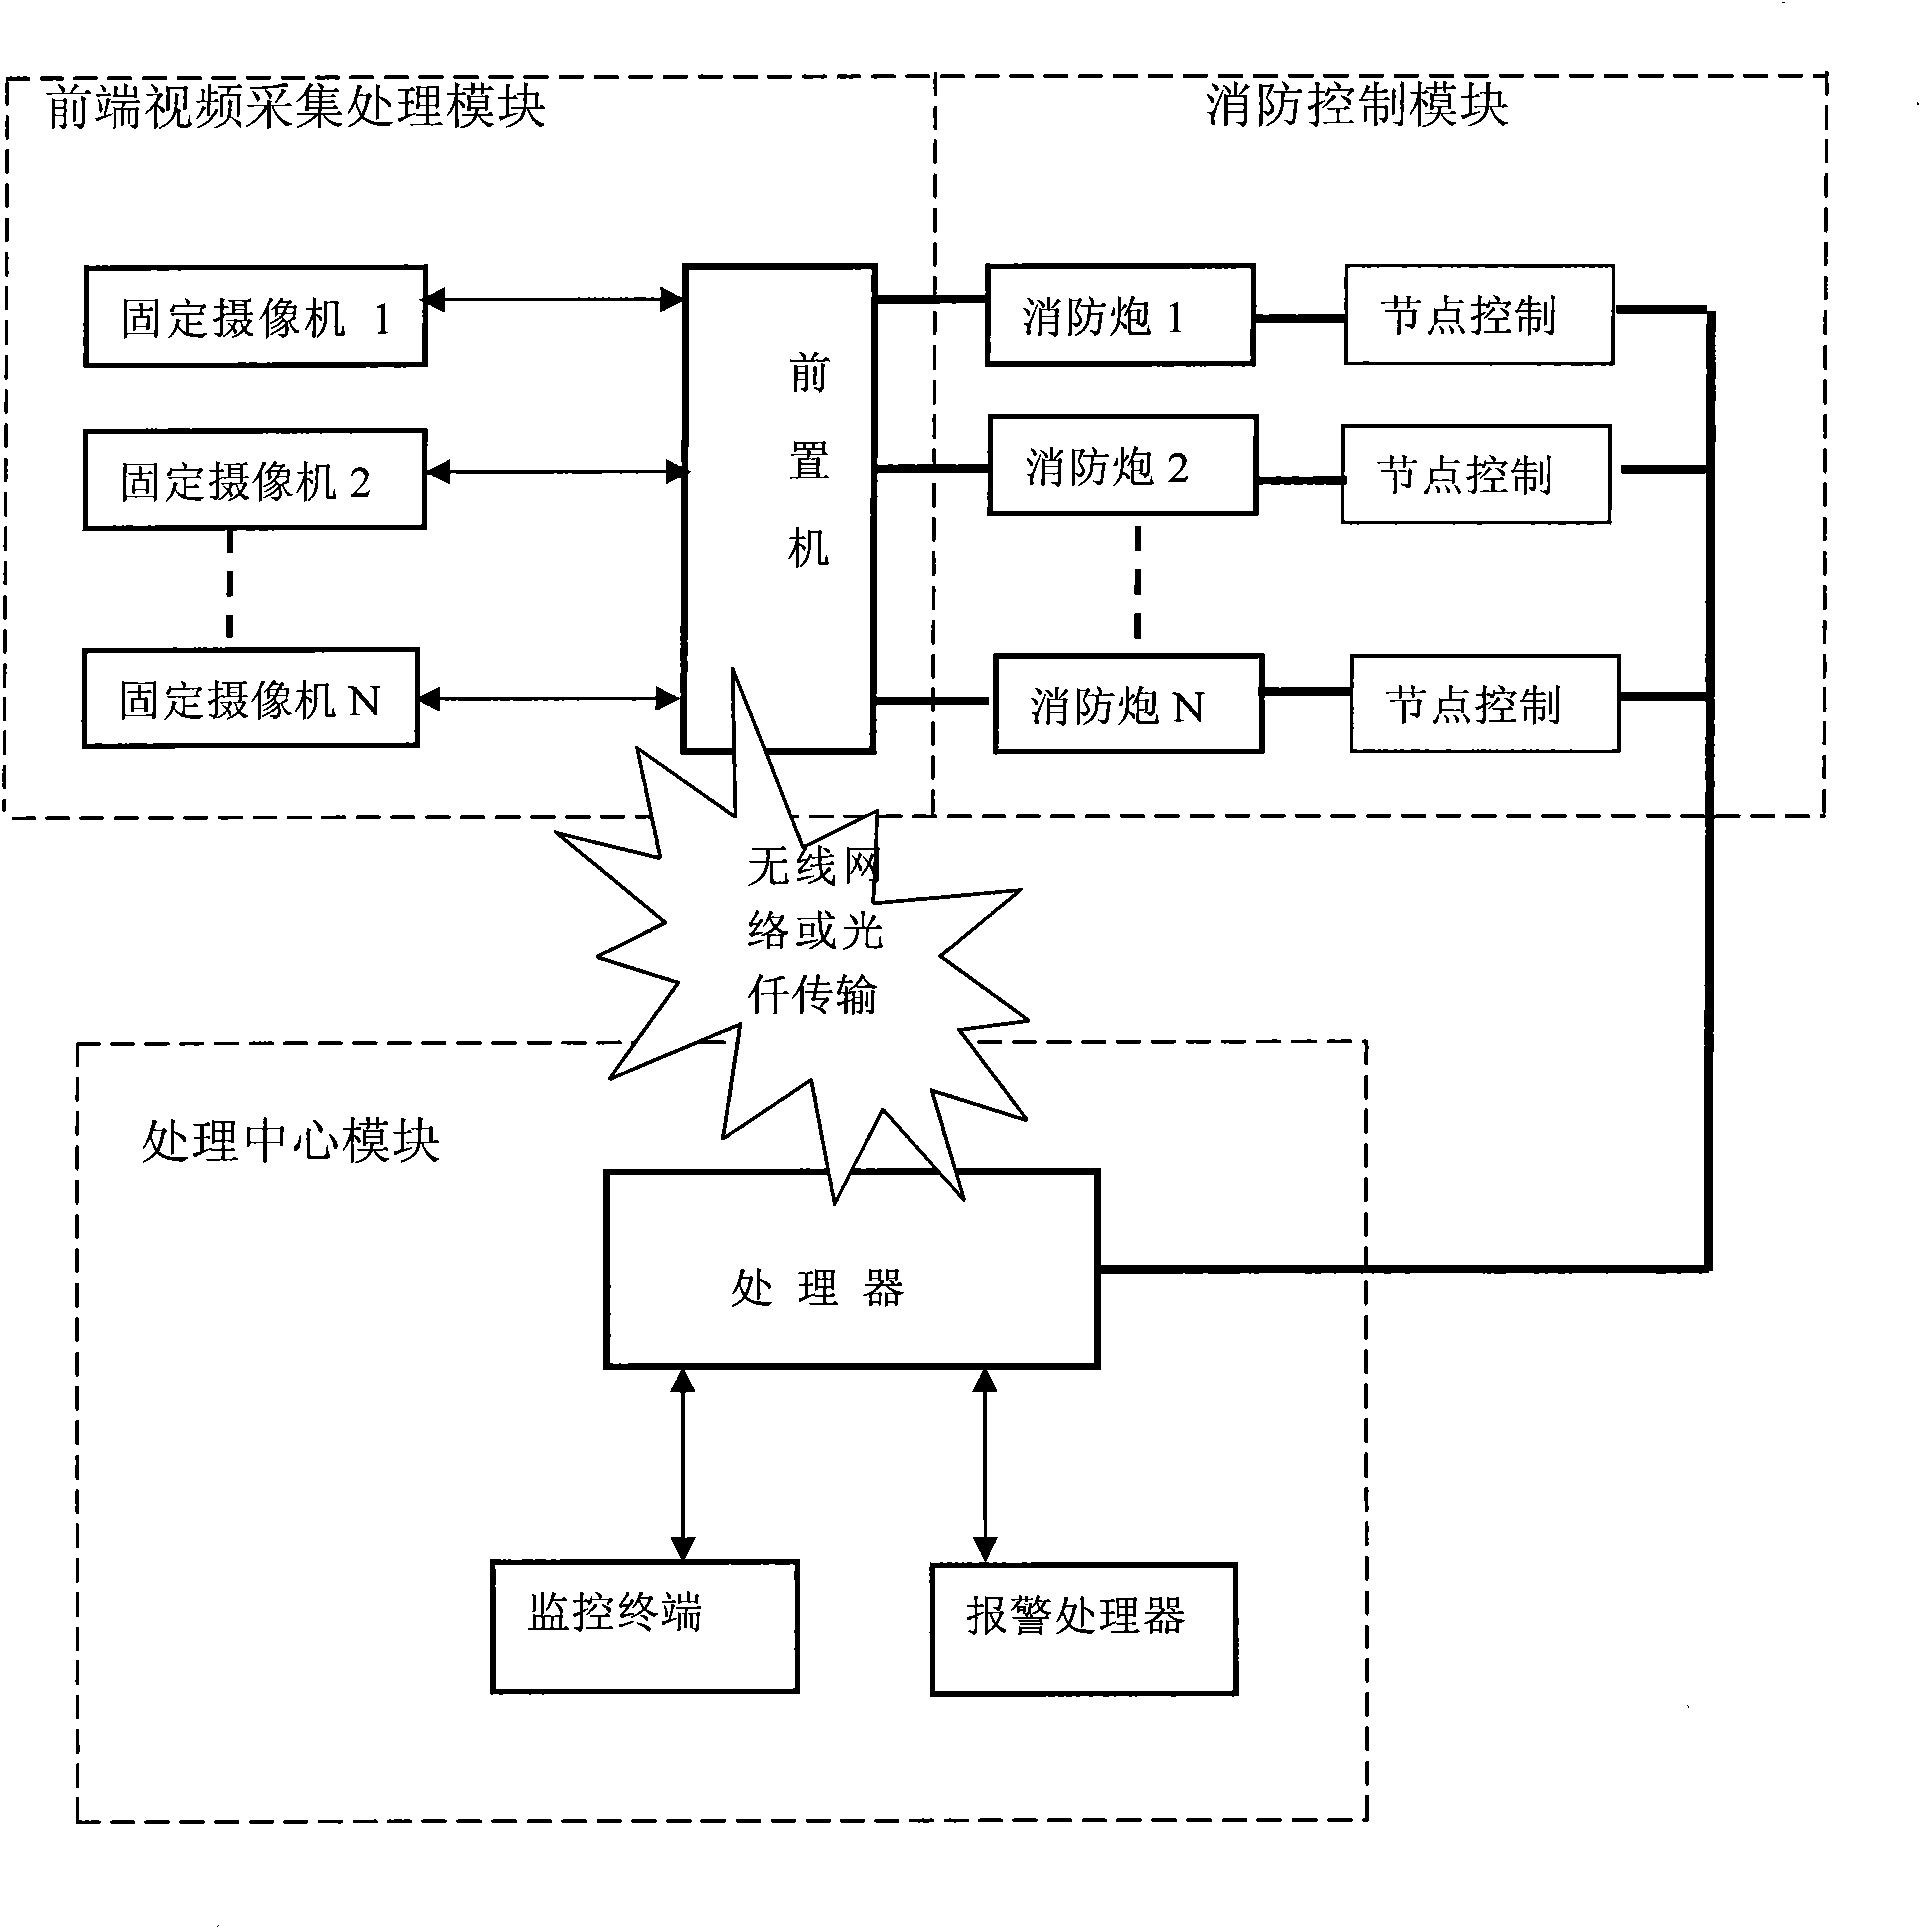 Image-based method of finding flames with large-space intelligent fire-fighting system